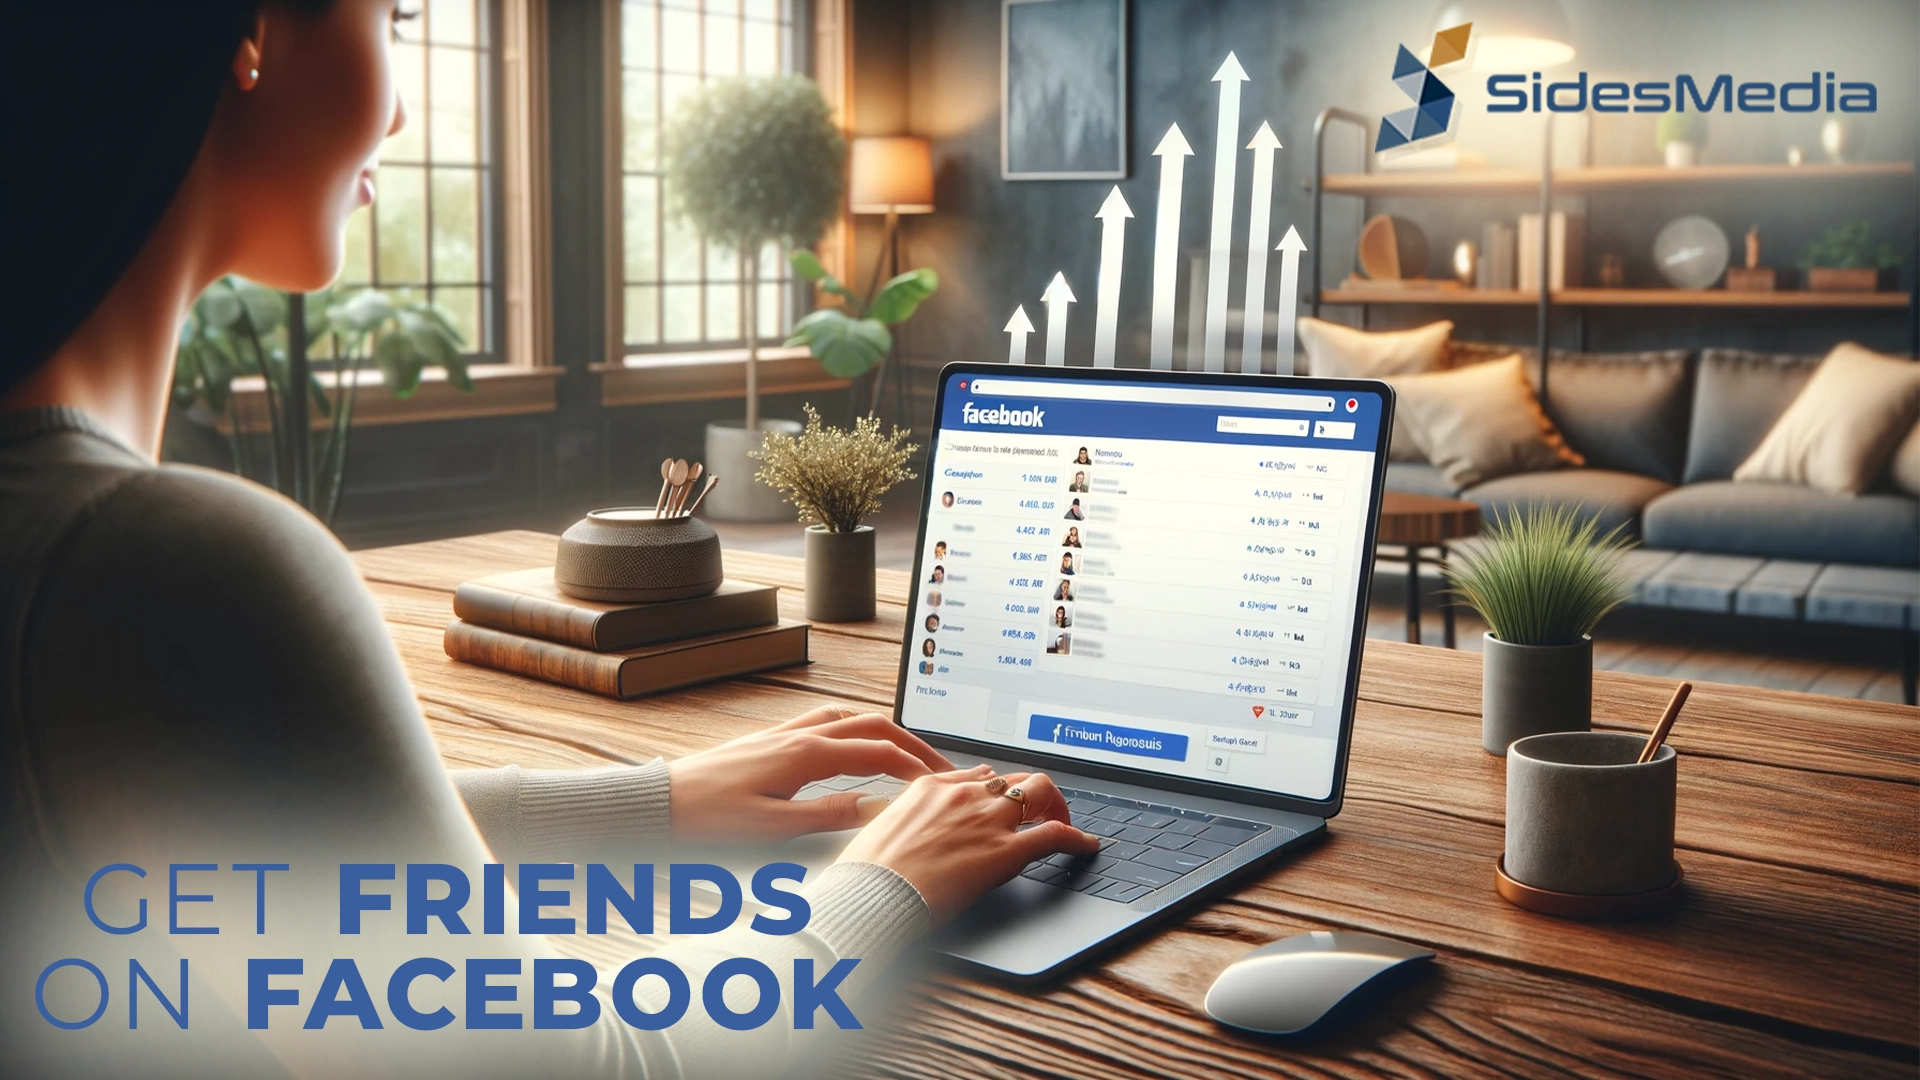 5 Best Ways: How to Get More Friends on Facebook